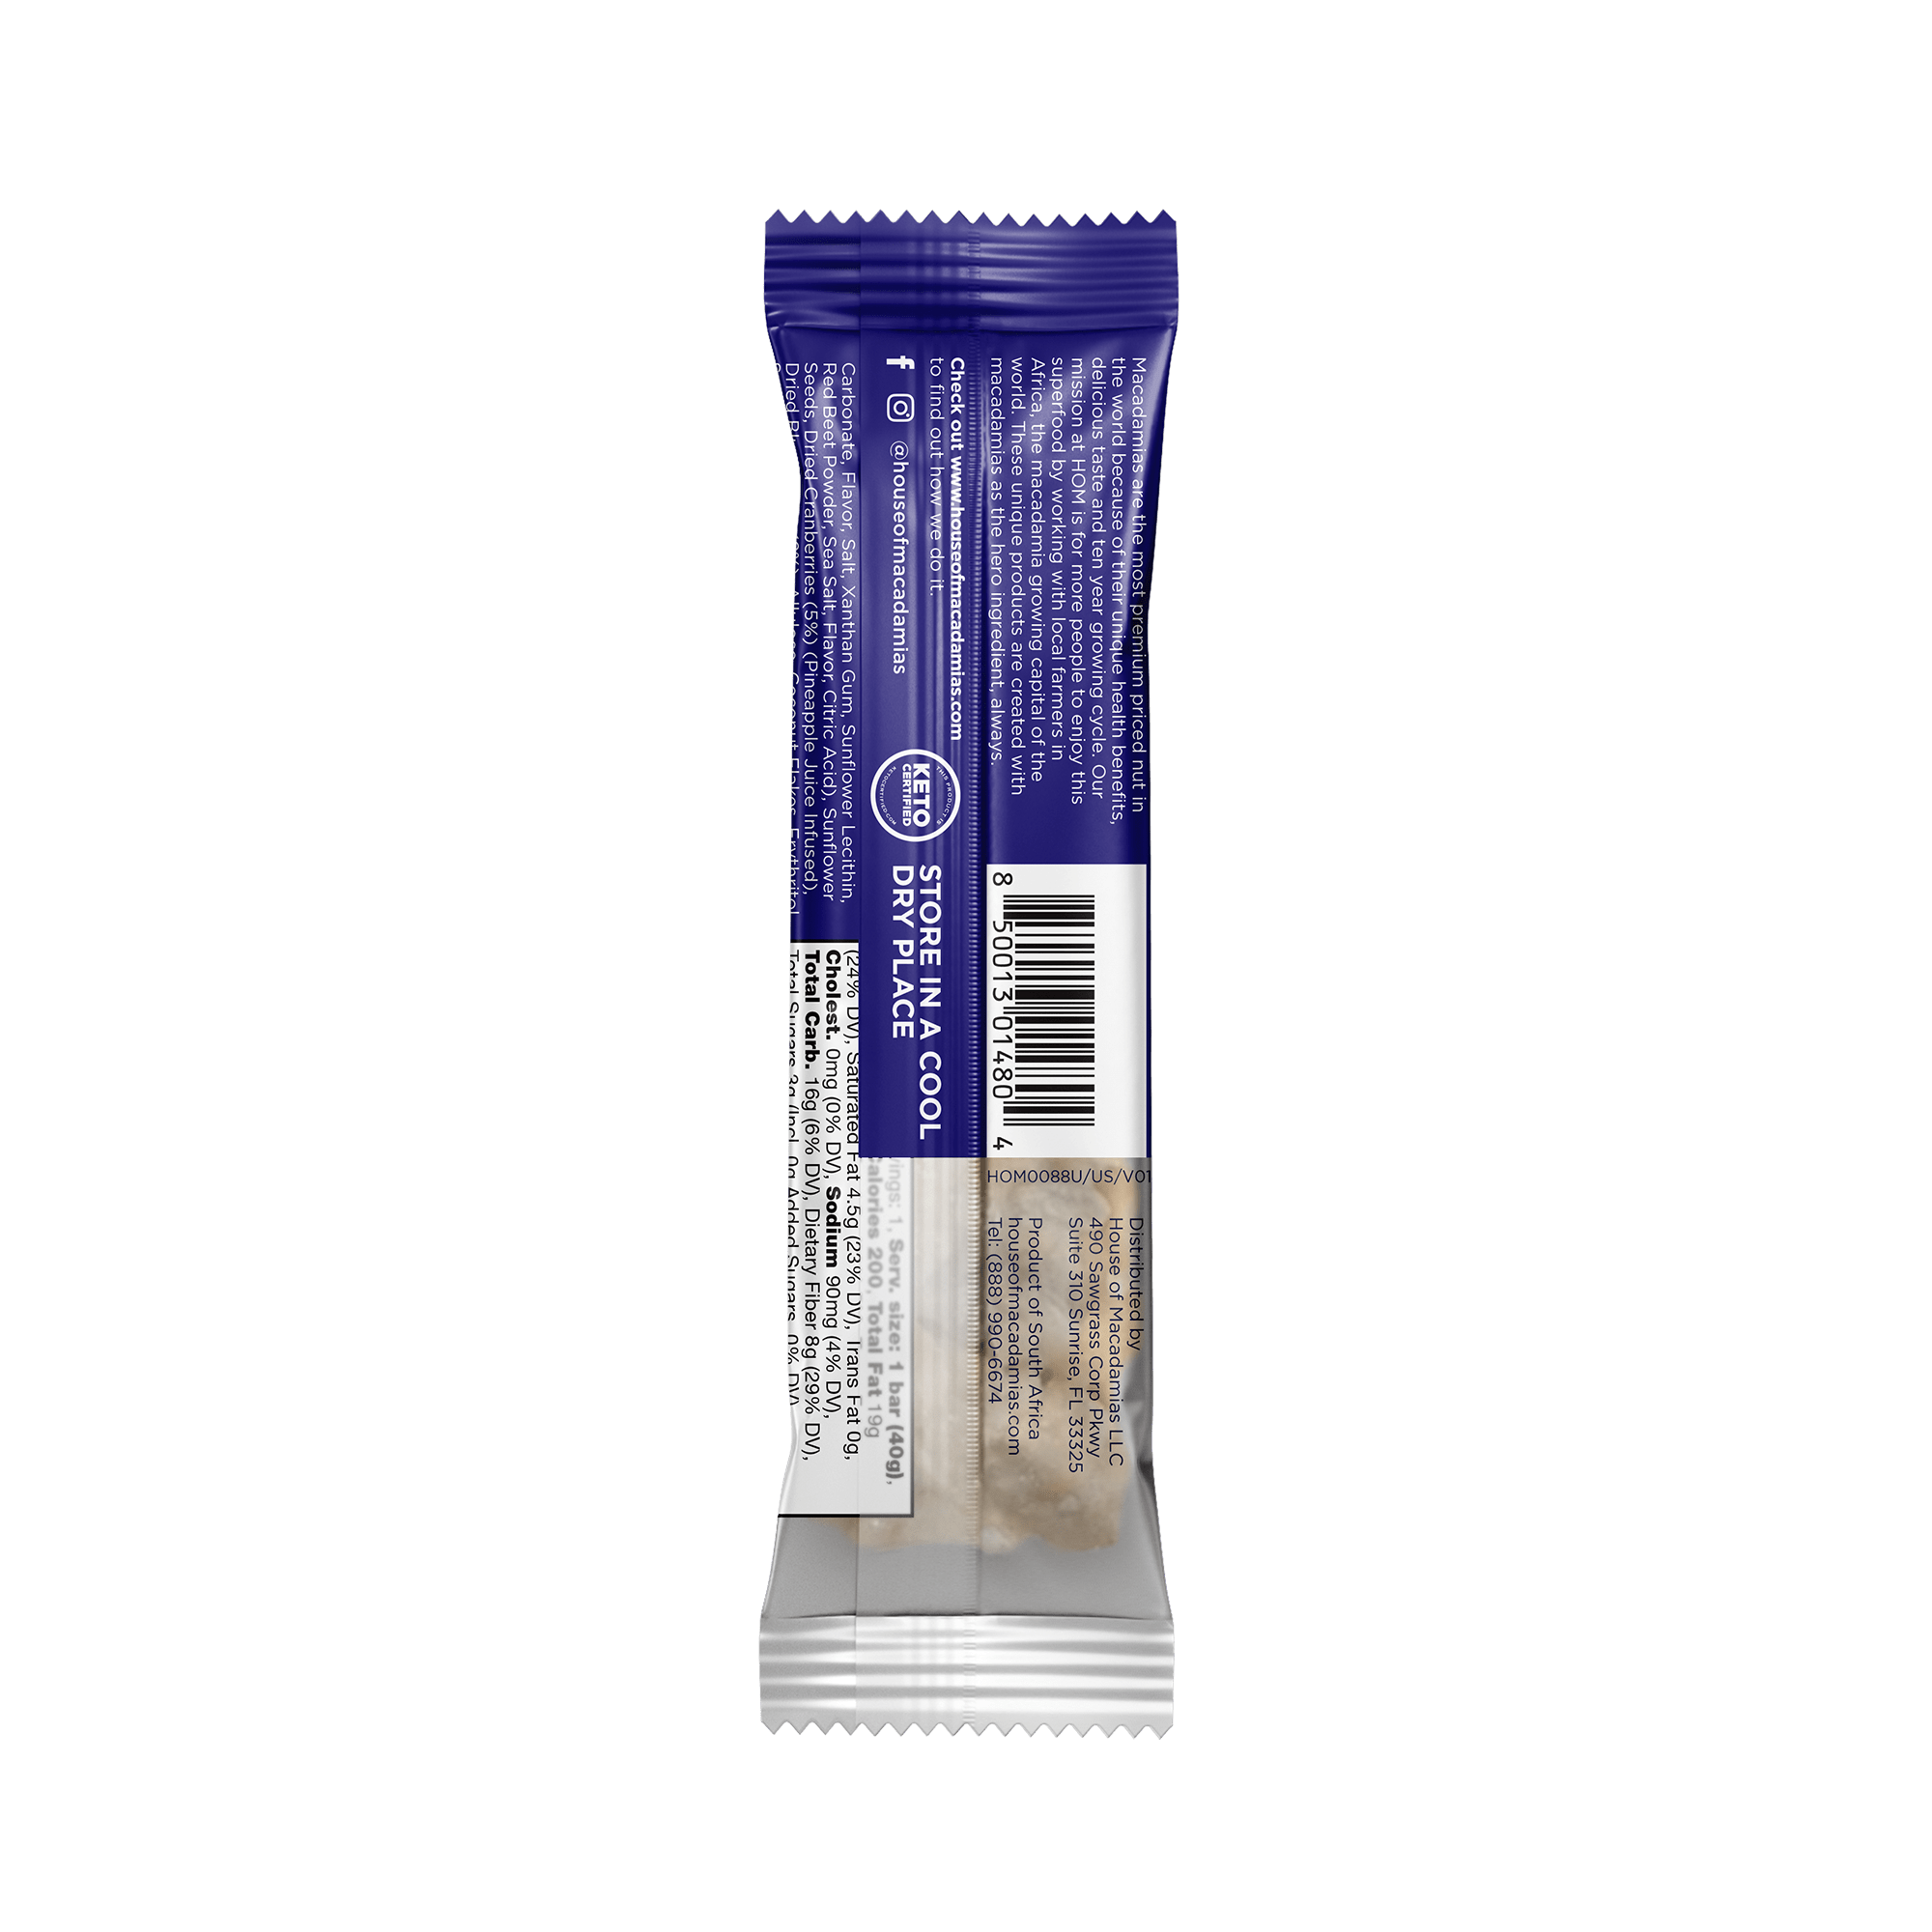 Blueberry White Chocolate Macadamia Snack Bar (12 Bars) | House of Macadamias | best nuts for keto